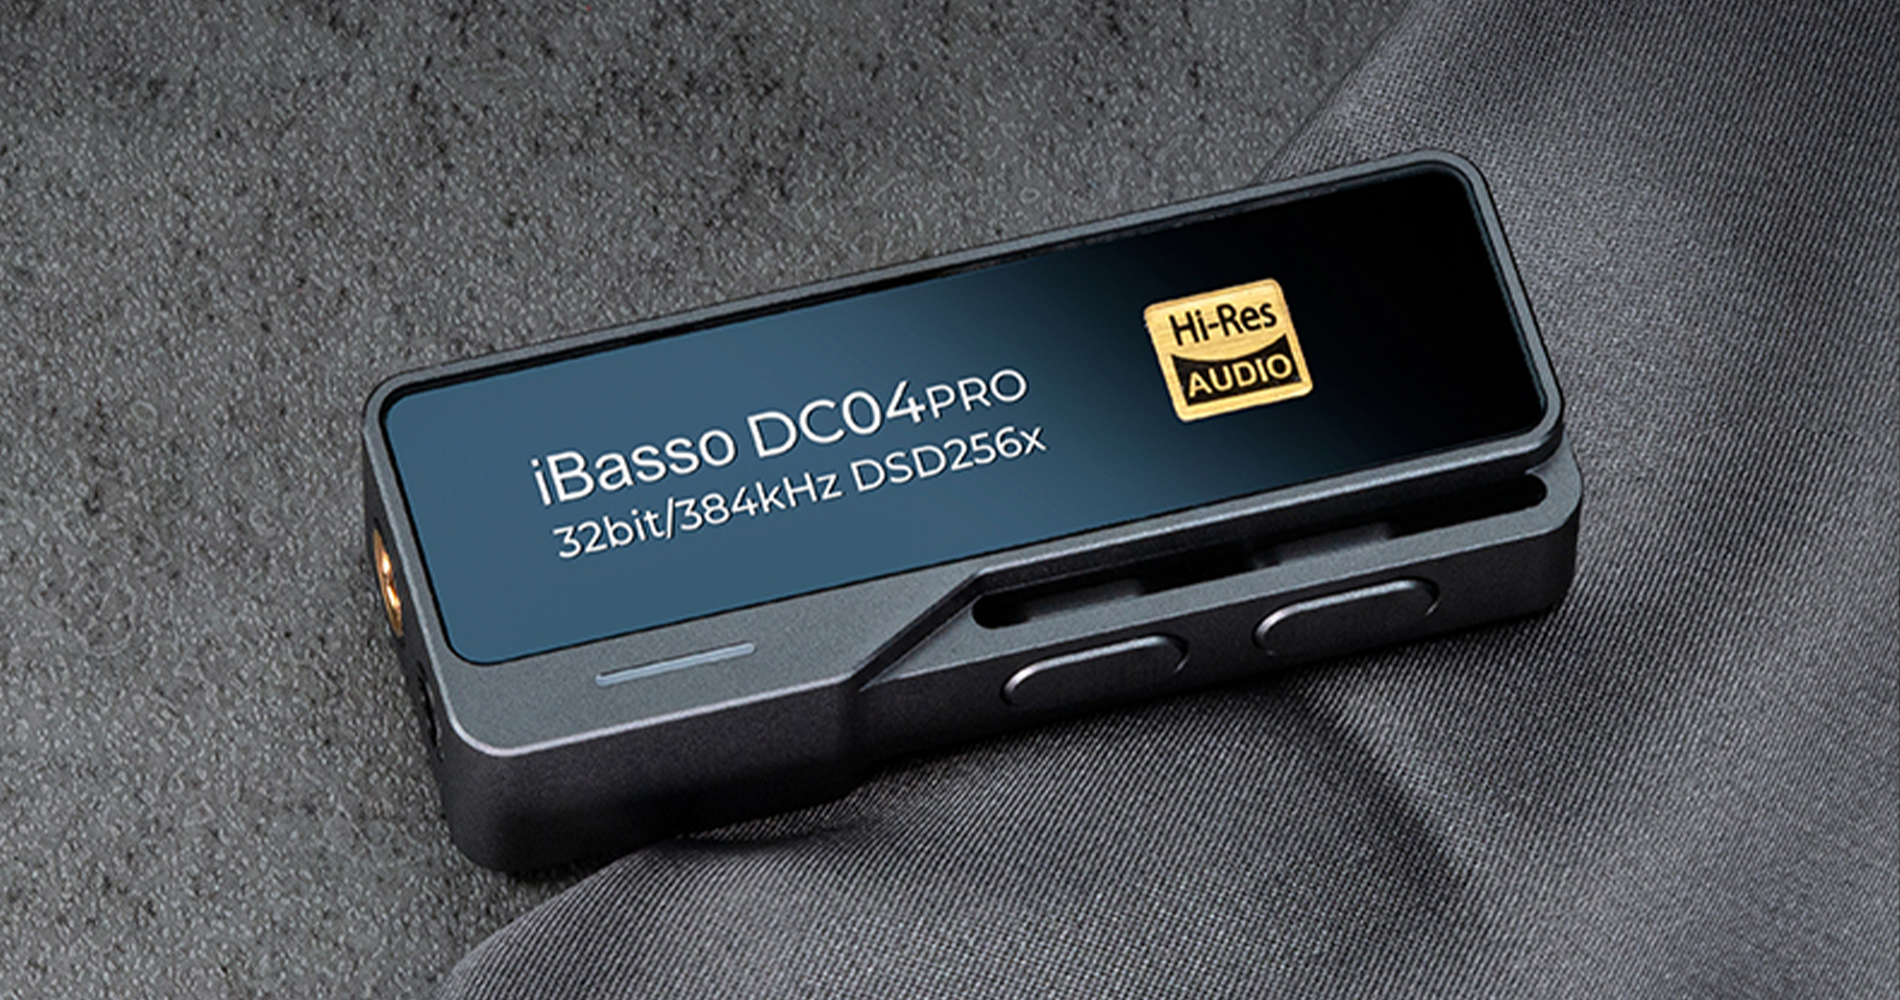 iBasso DC04PRO Portable USB DAC/Amp Lower Power Consumption